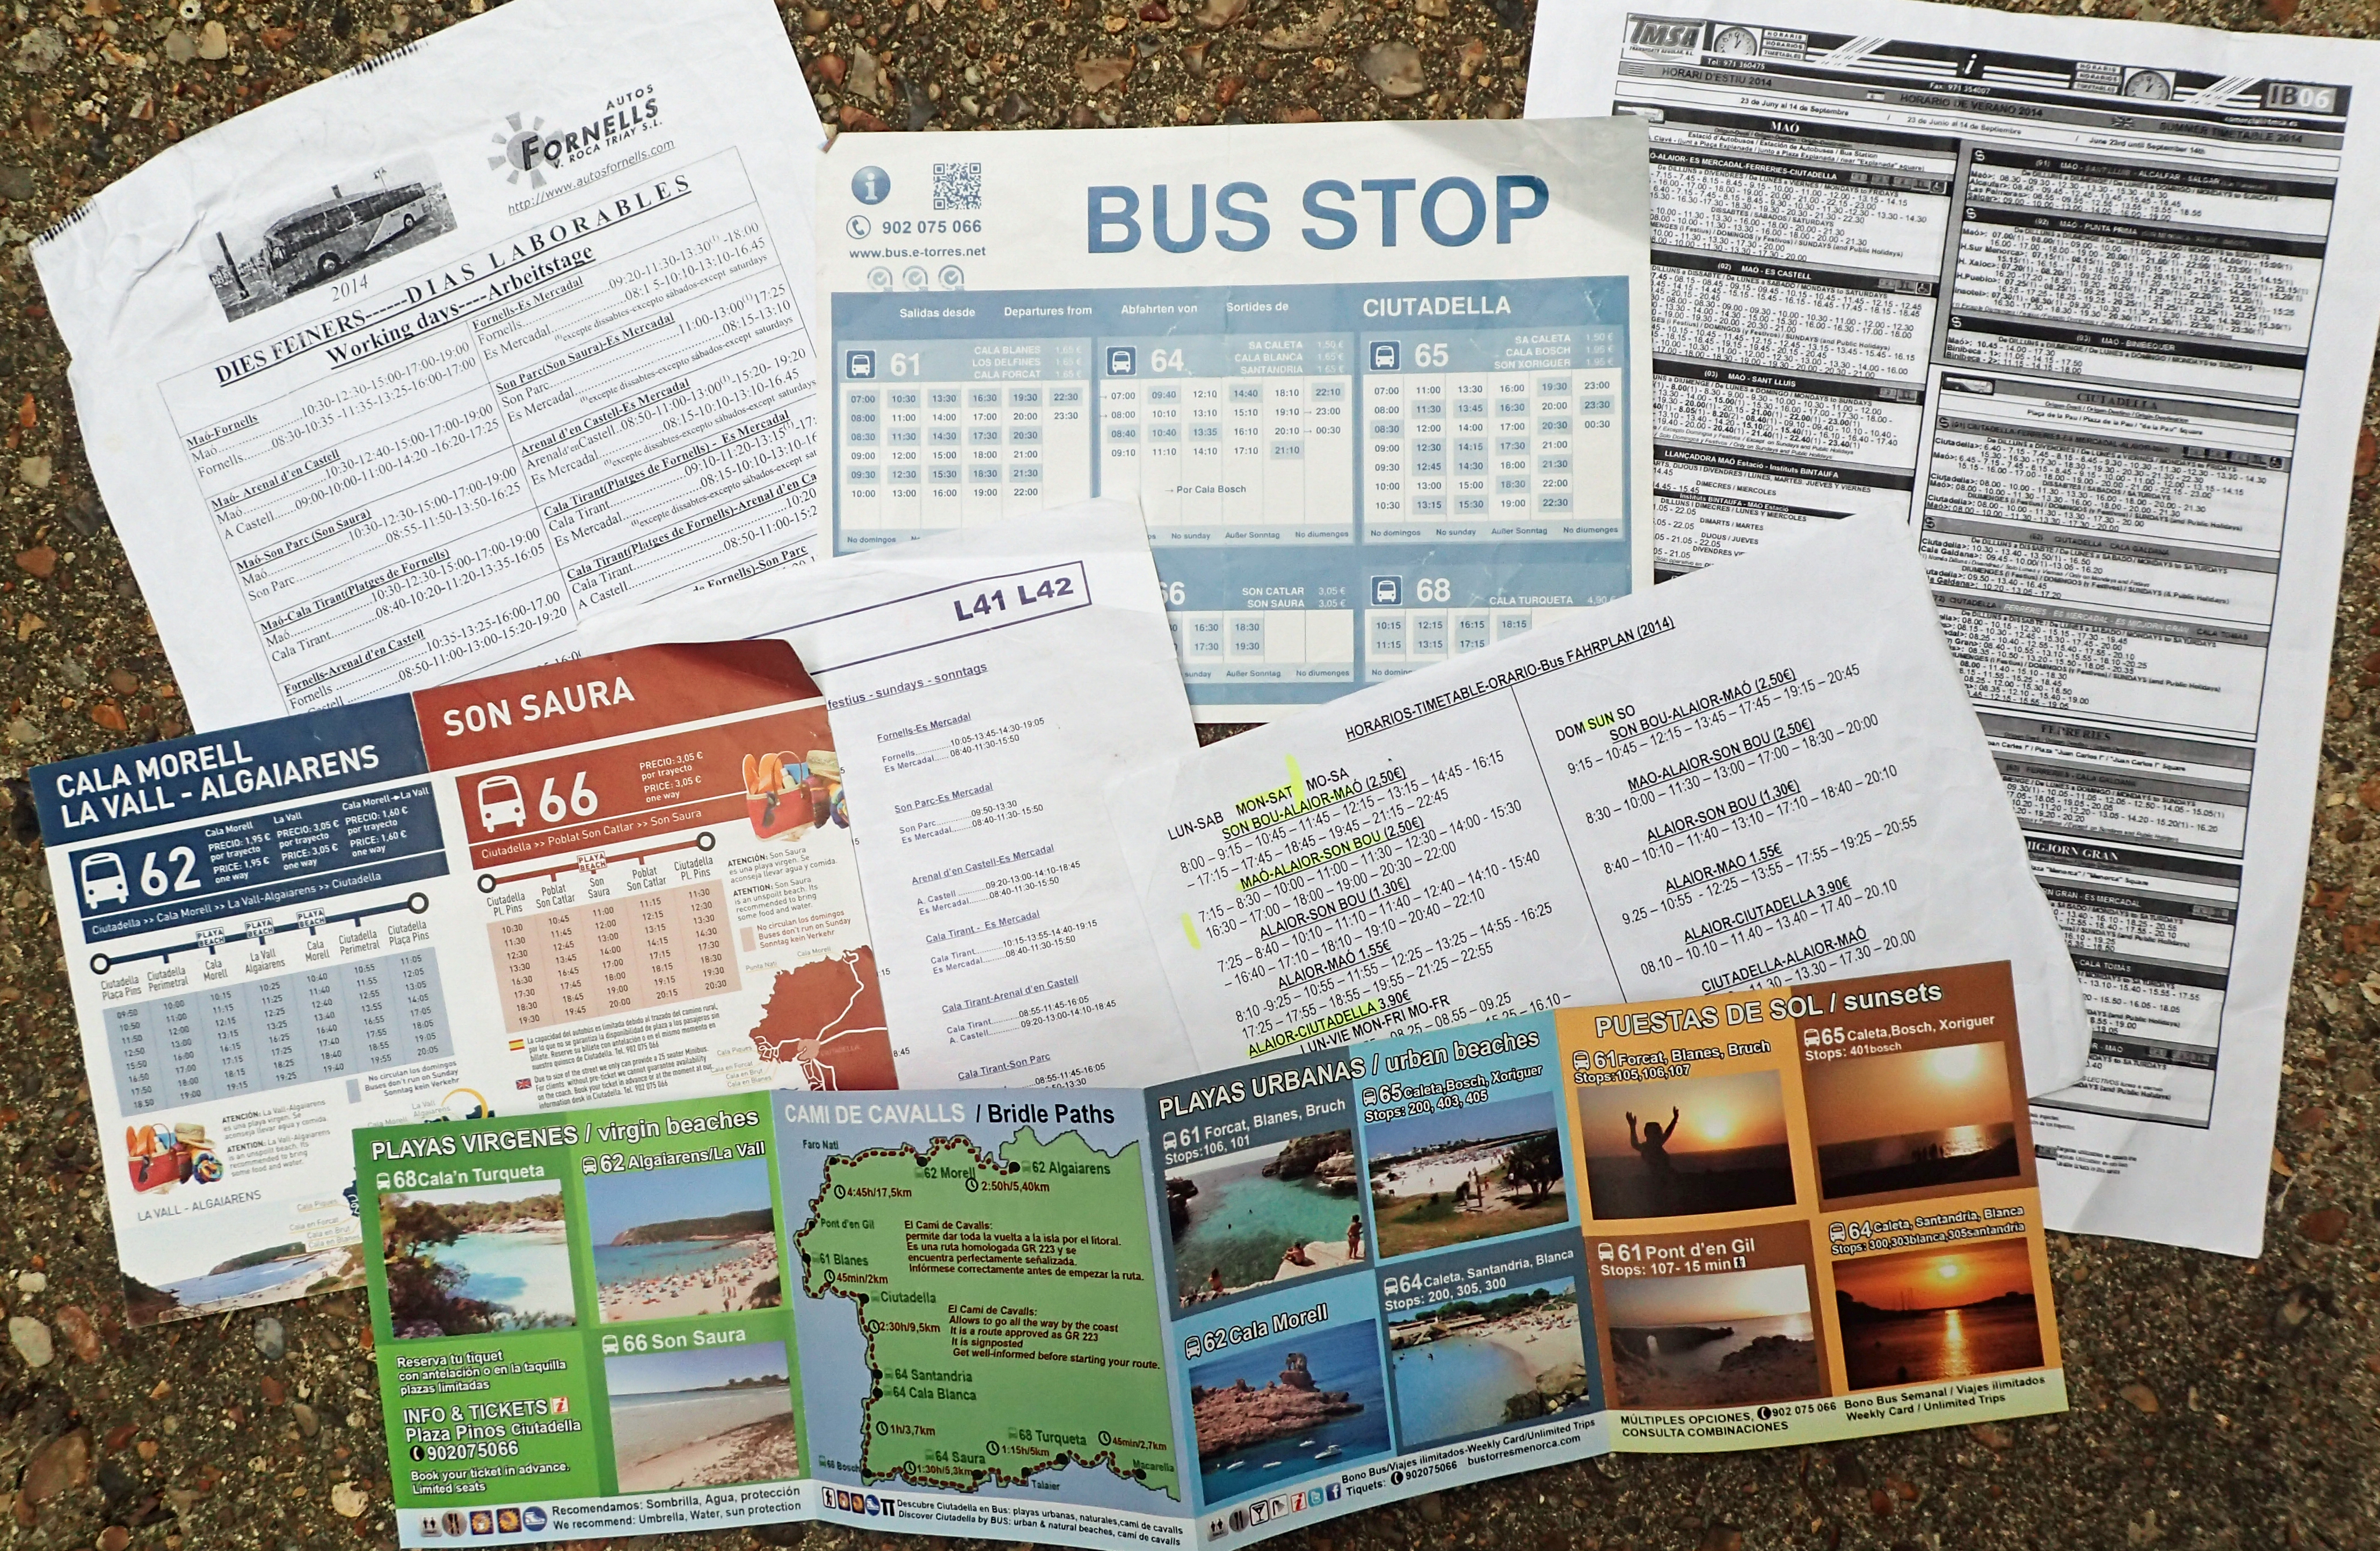 It is wise to pick up any bus timetable you can find when in foreign climes. You can discover practical and useful alternatives that aren't always obvious from scant web-based pages